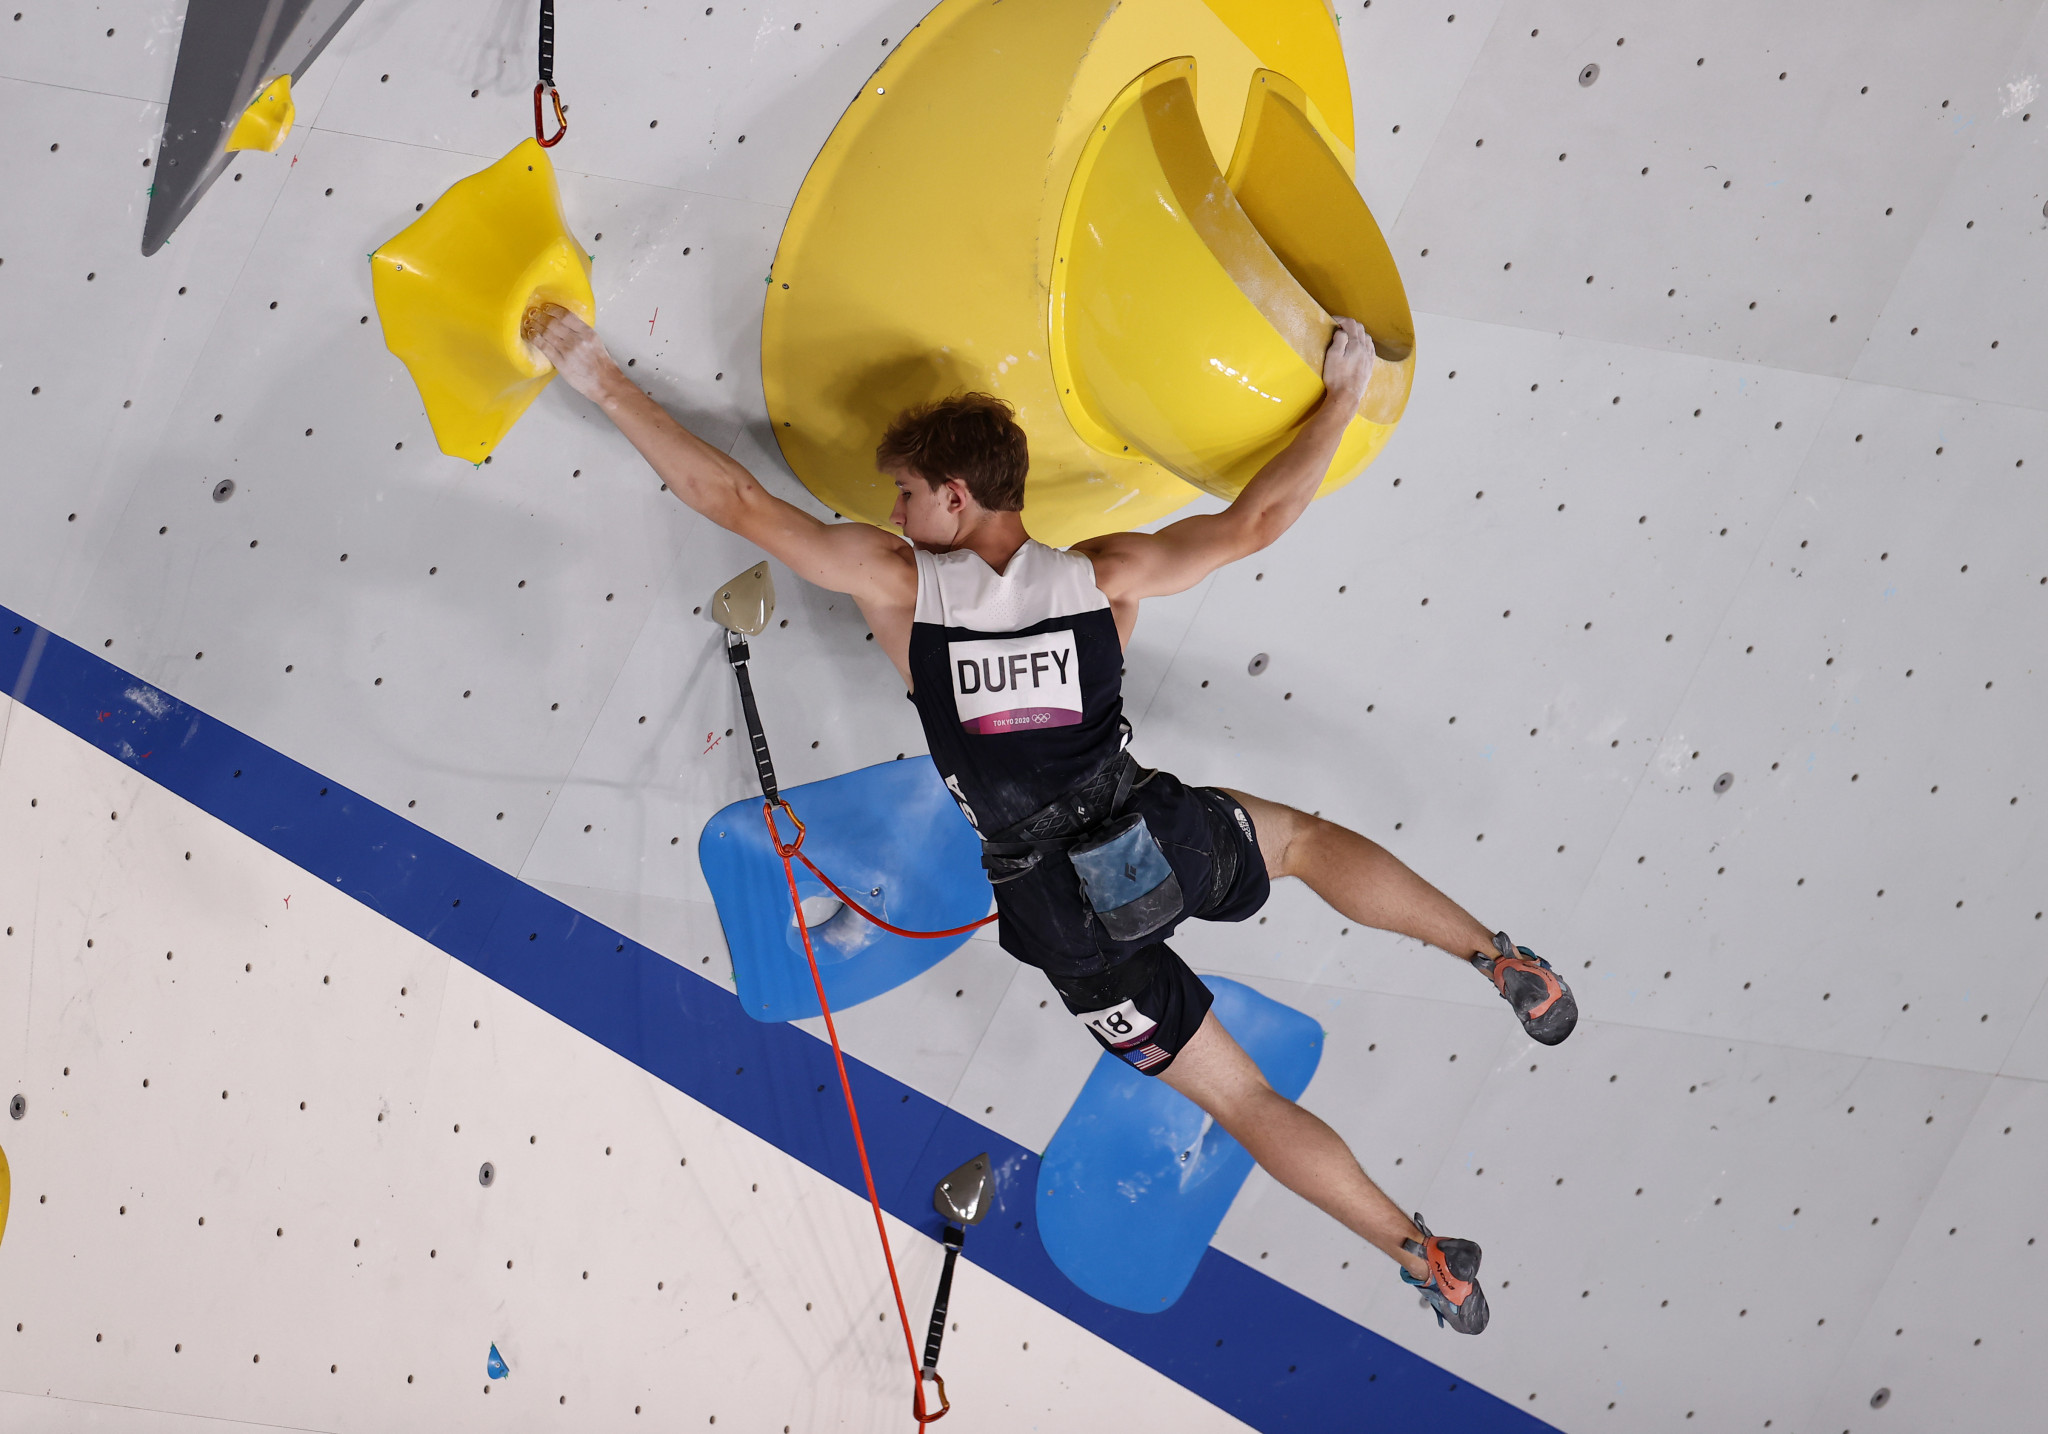 Colin Duffy won his first IFSC World Cup event today in boulder ©Getty Images